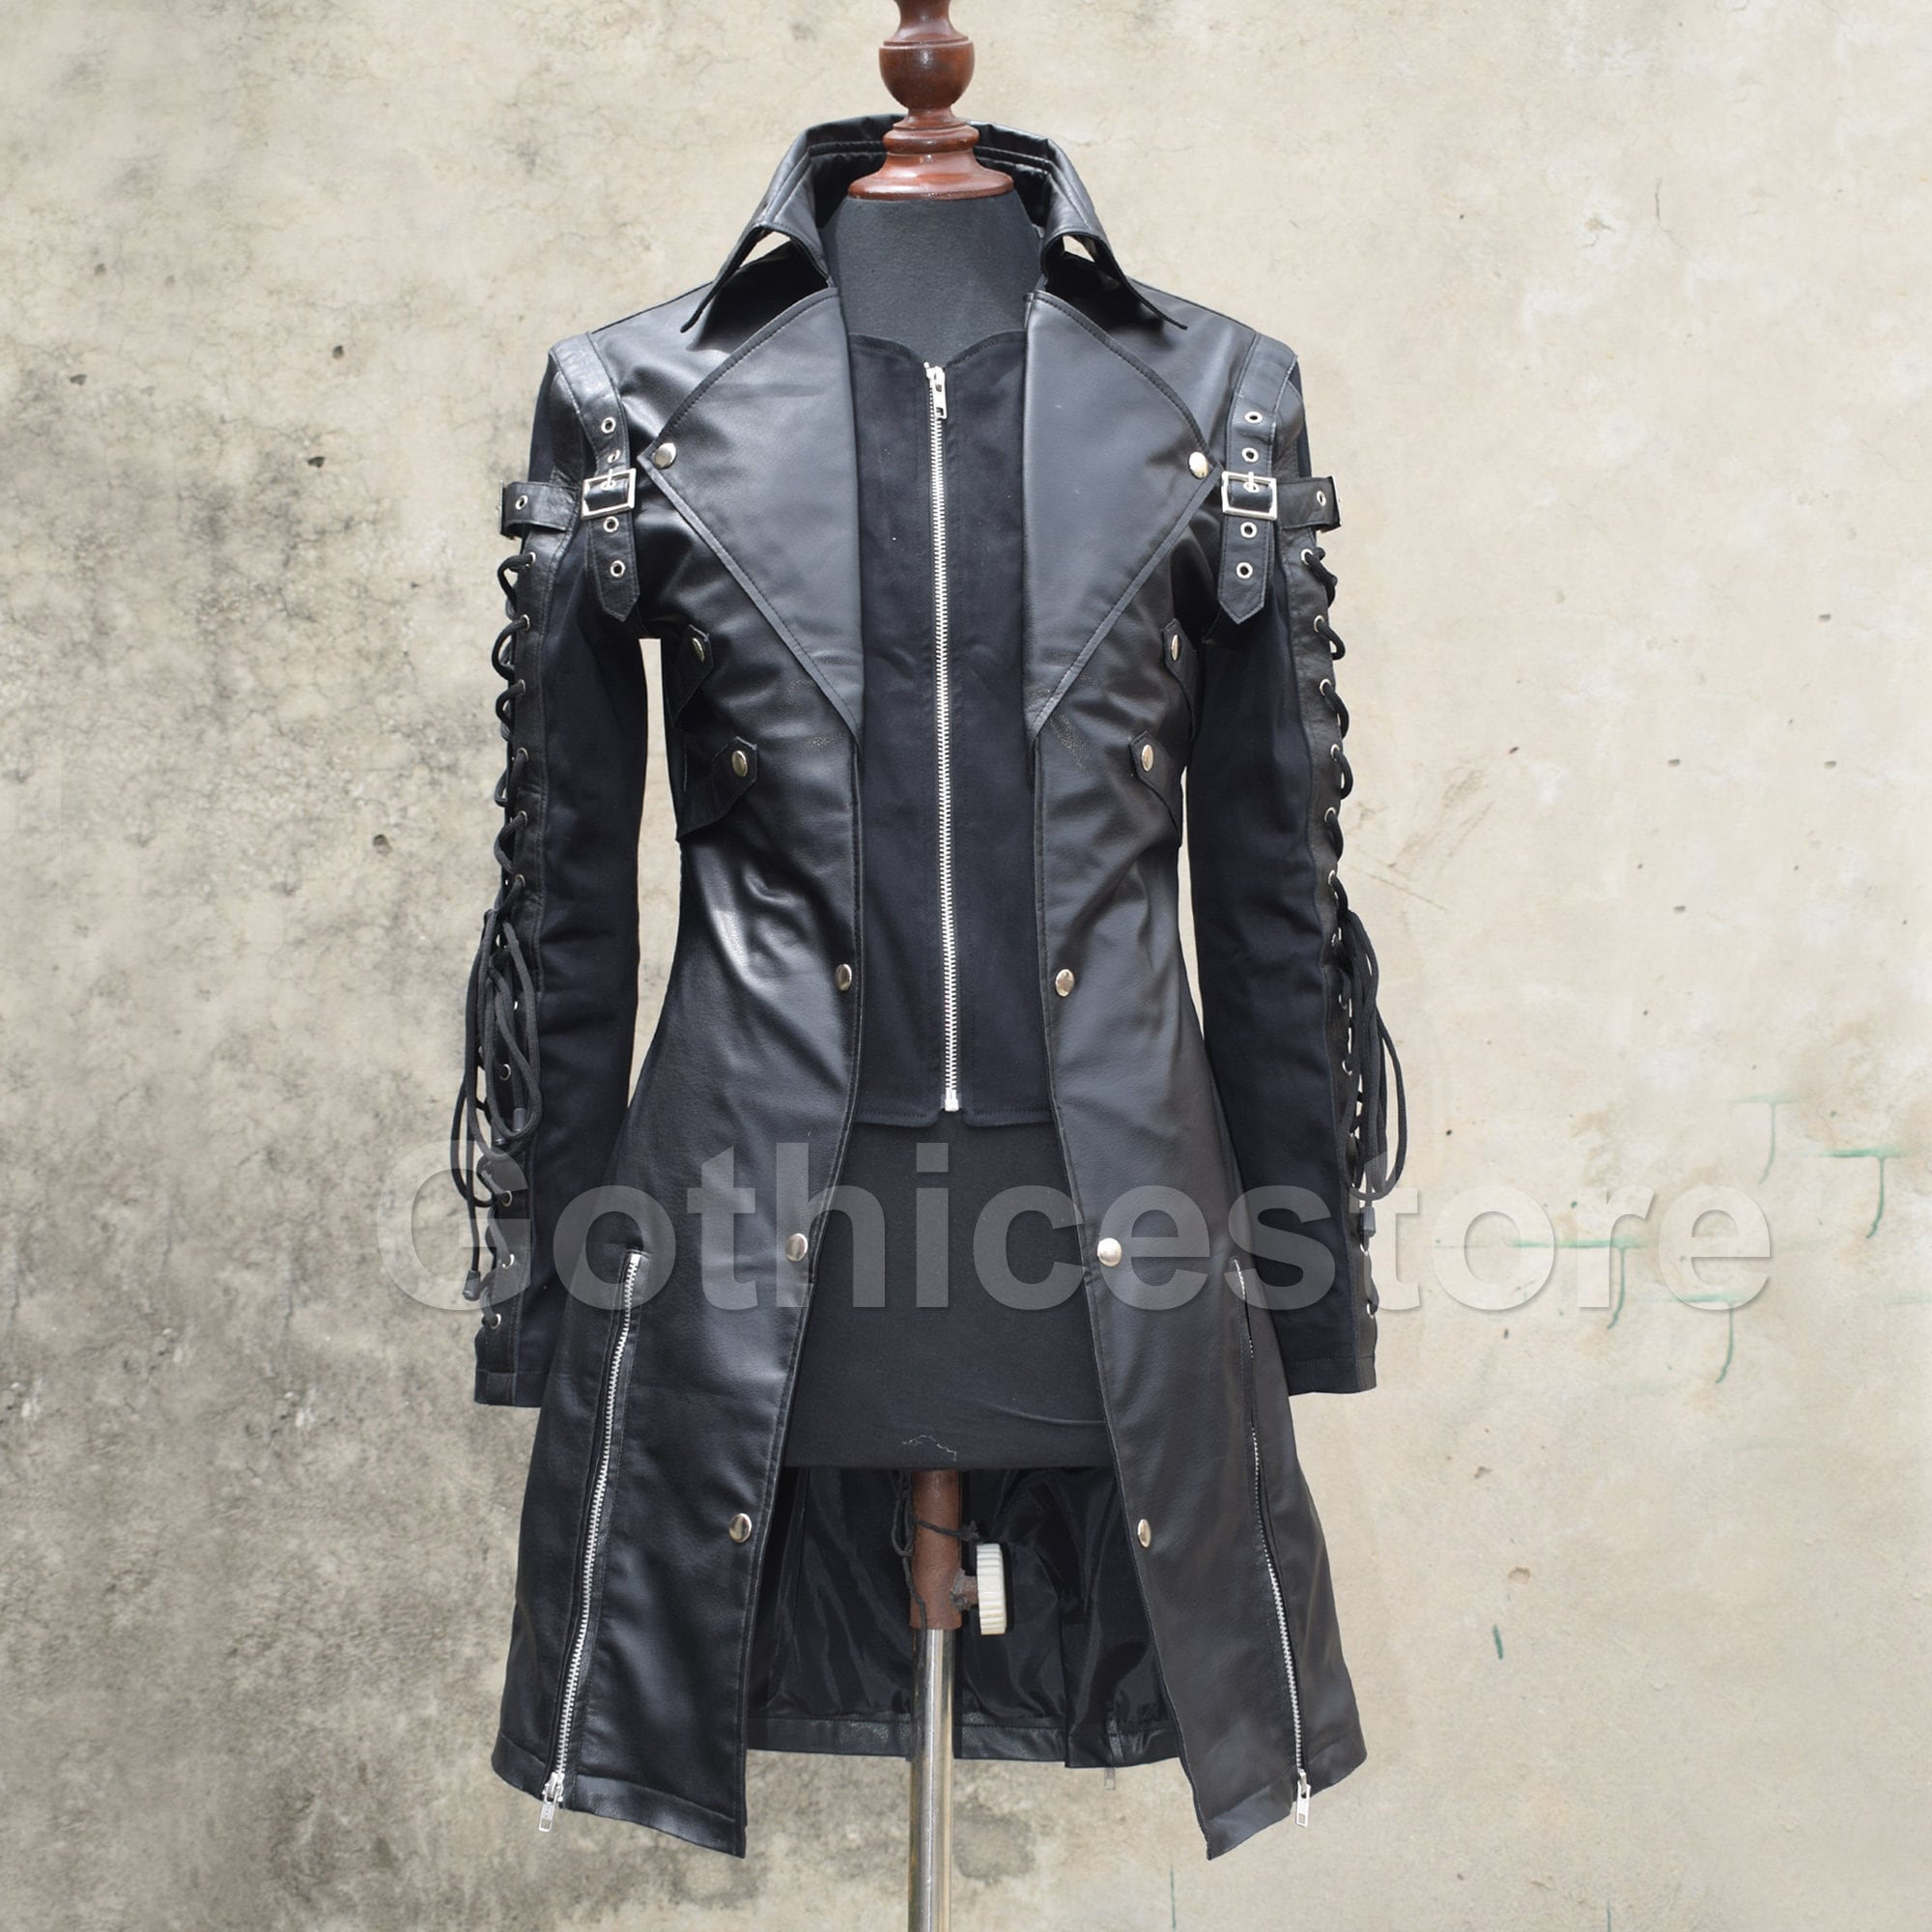 Mens Cotton blend Hooded Long Gothic Trench Coats Jackets Outwear Punk Black 